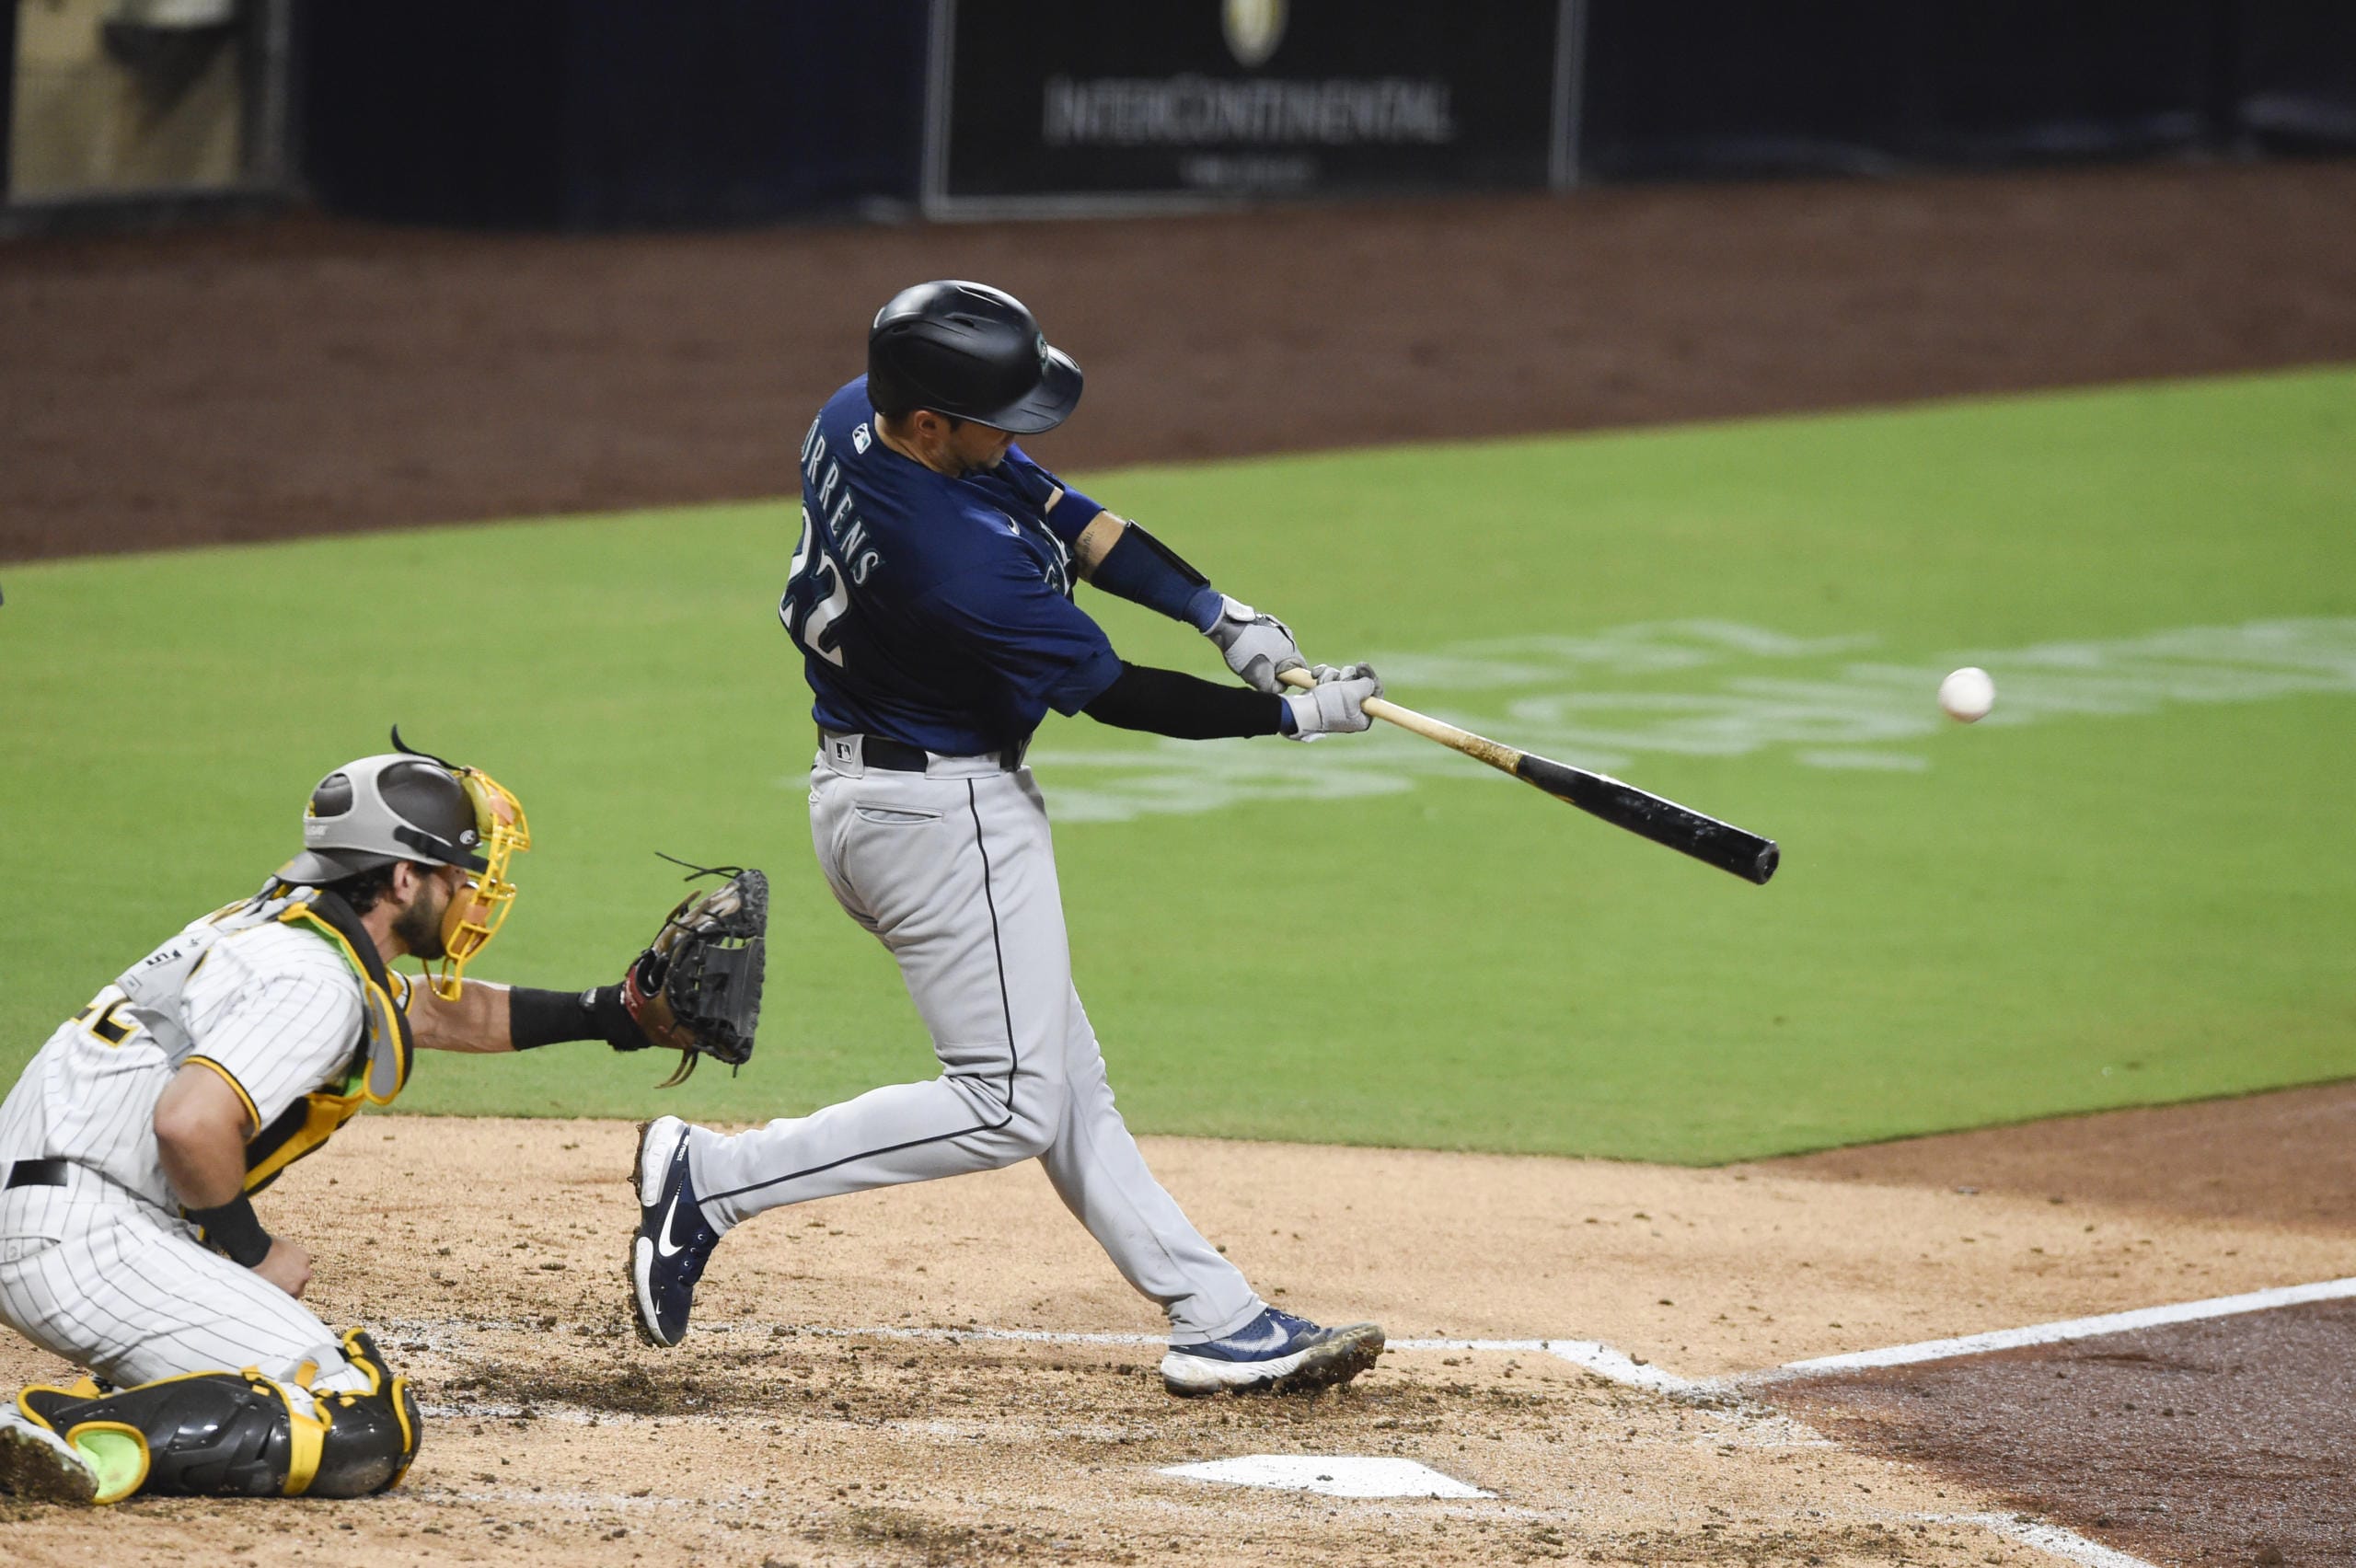 Seattle Mariners' Luis Torrens hits an RBI double during the third inning of the team's baseball game against the San Diego Padres on Saturday, Sept. 19, 2020, in San Diego.